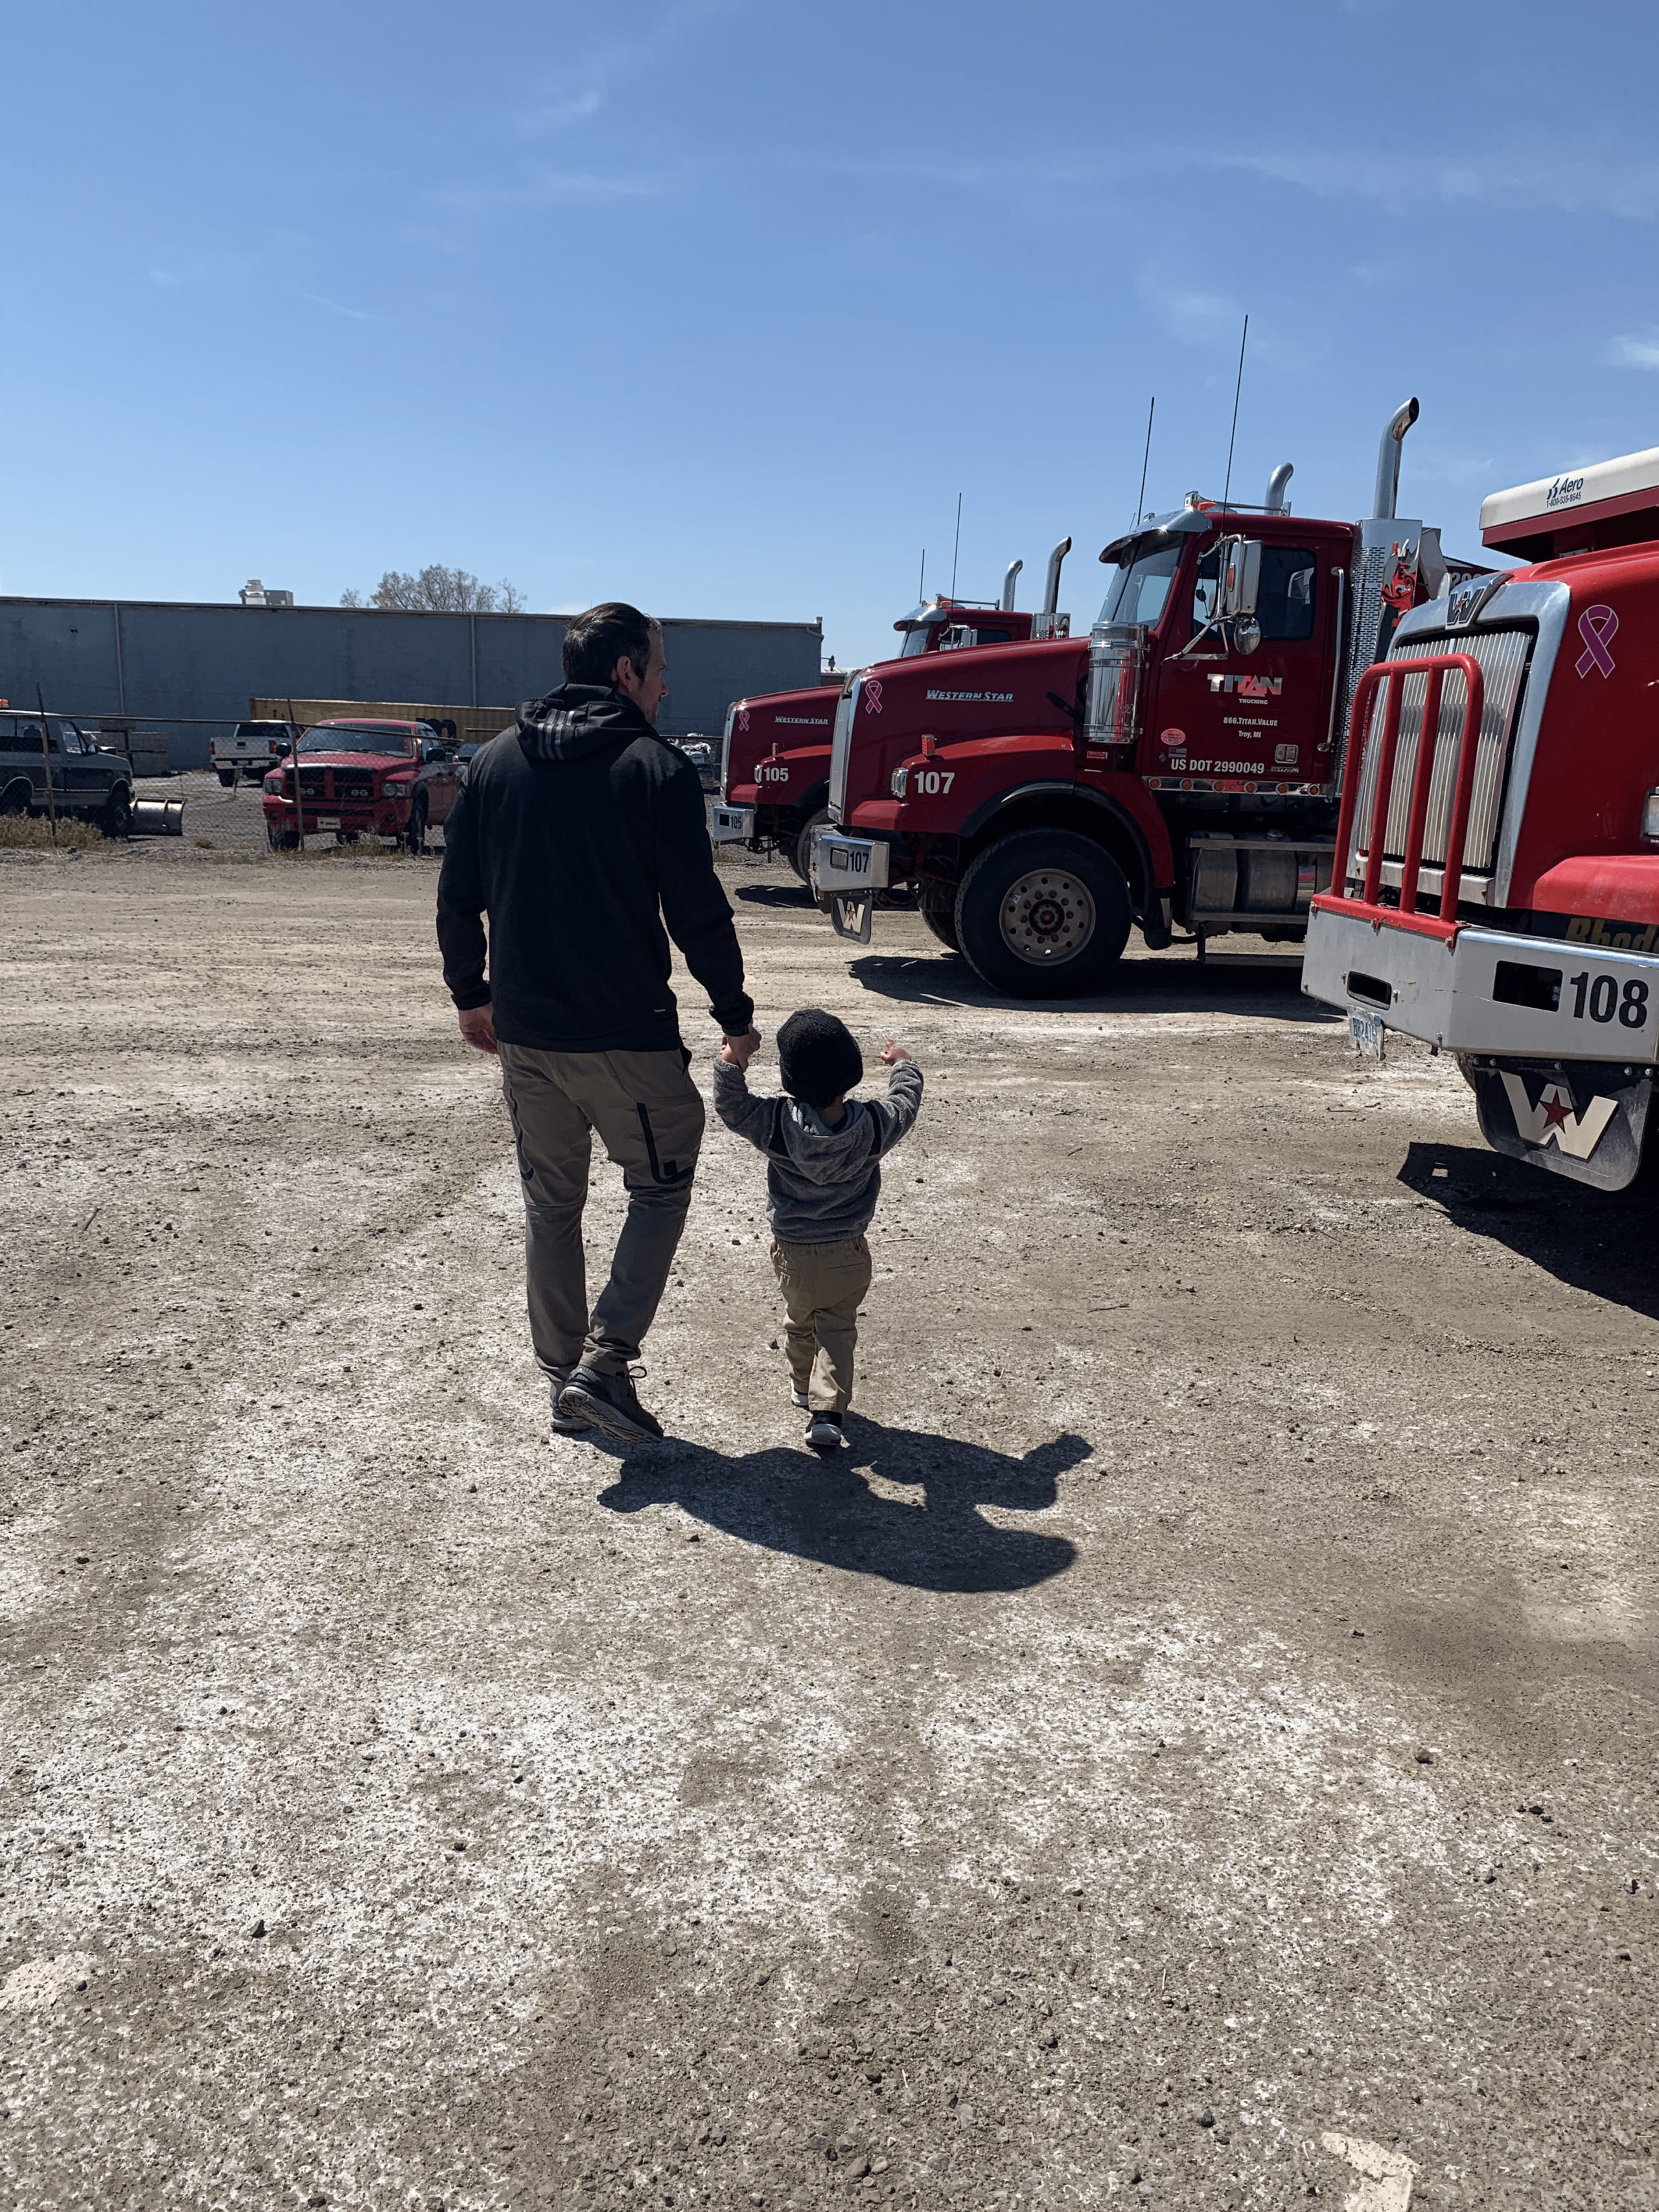 Jeff Riizzo and son, walking in the Truck yard at Titan.